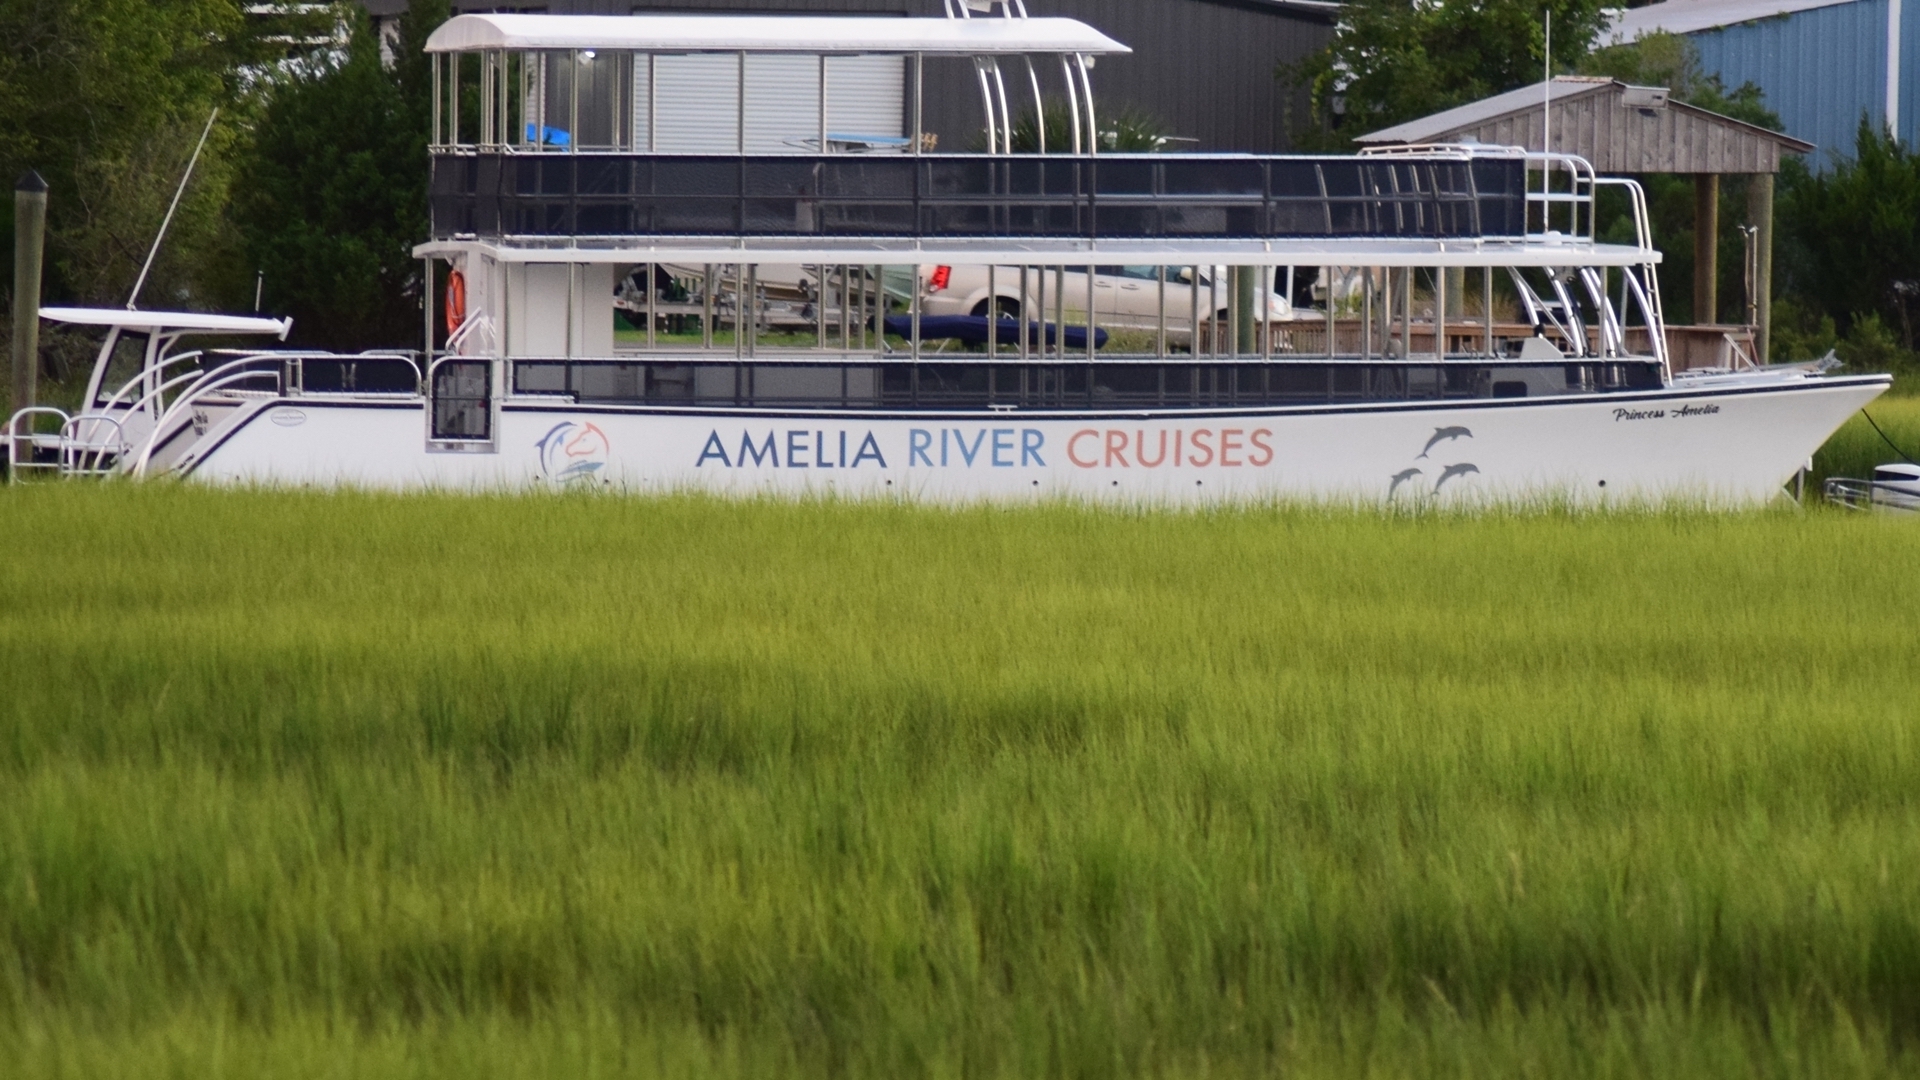 Amelia River Cruises two-deck boat